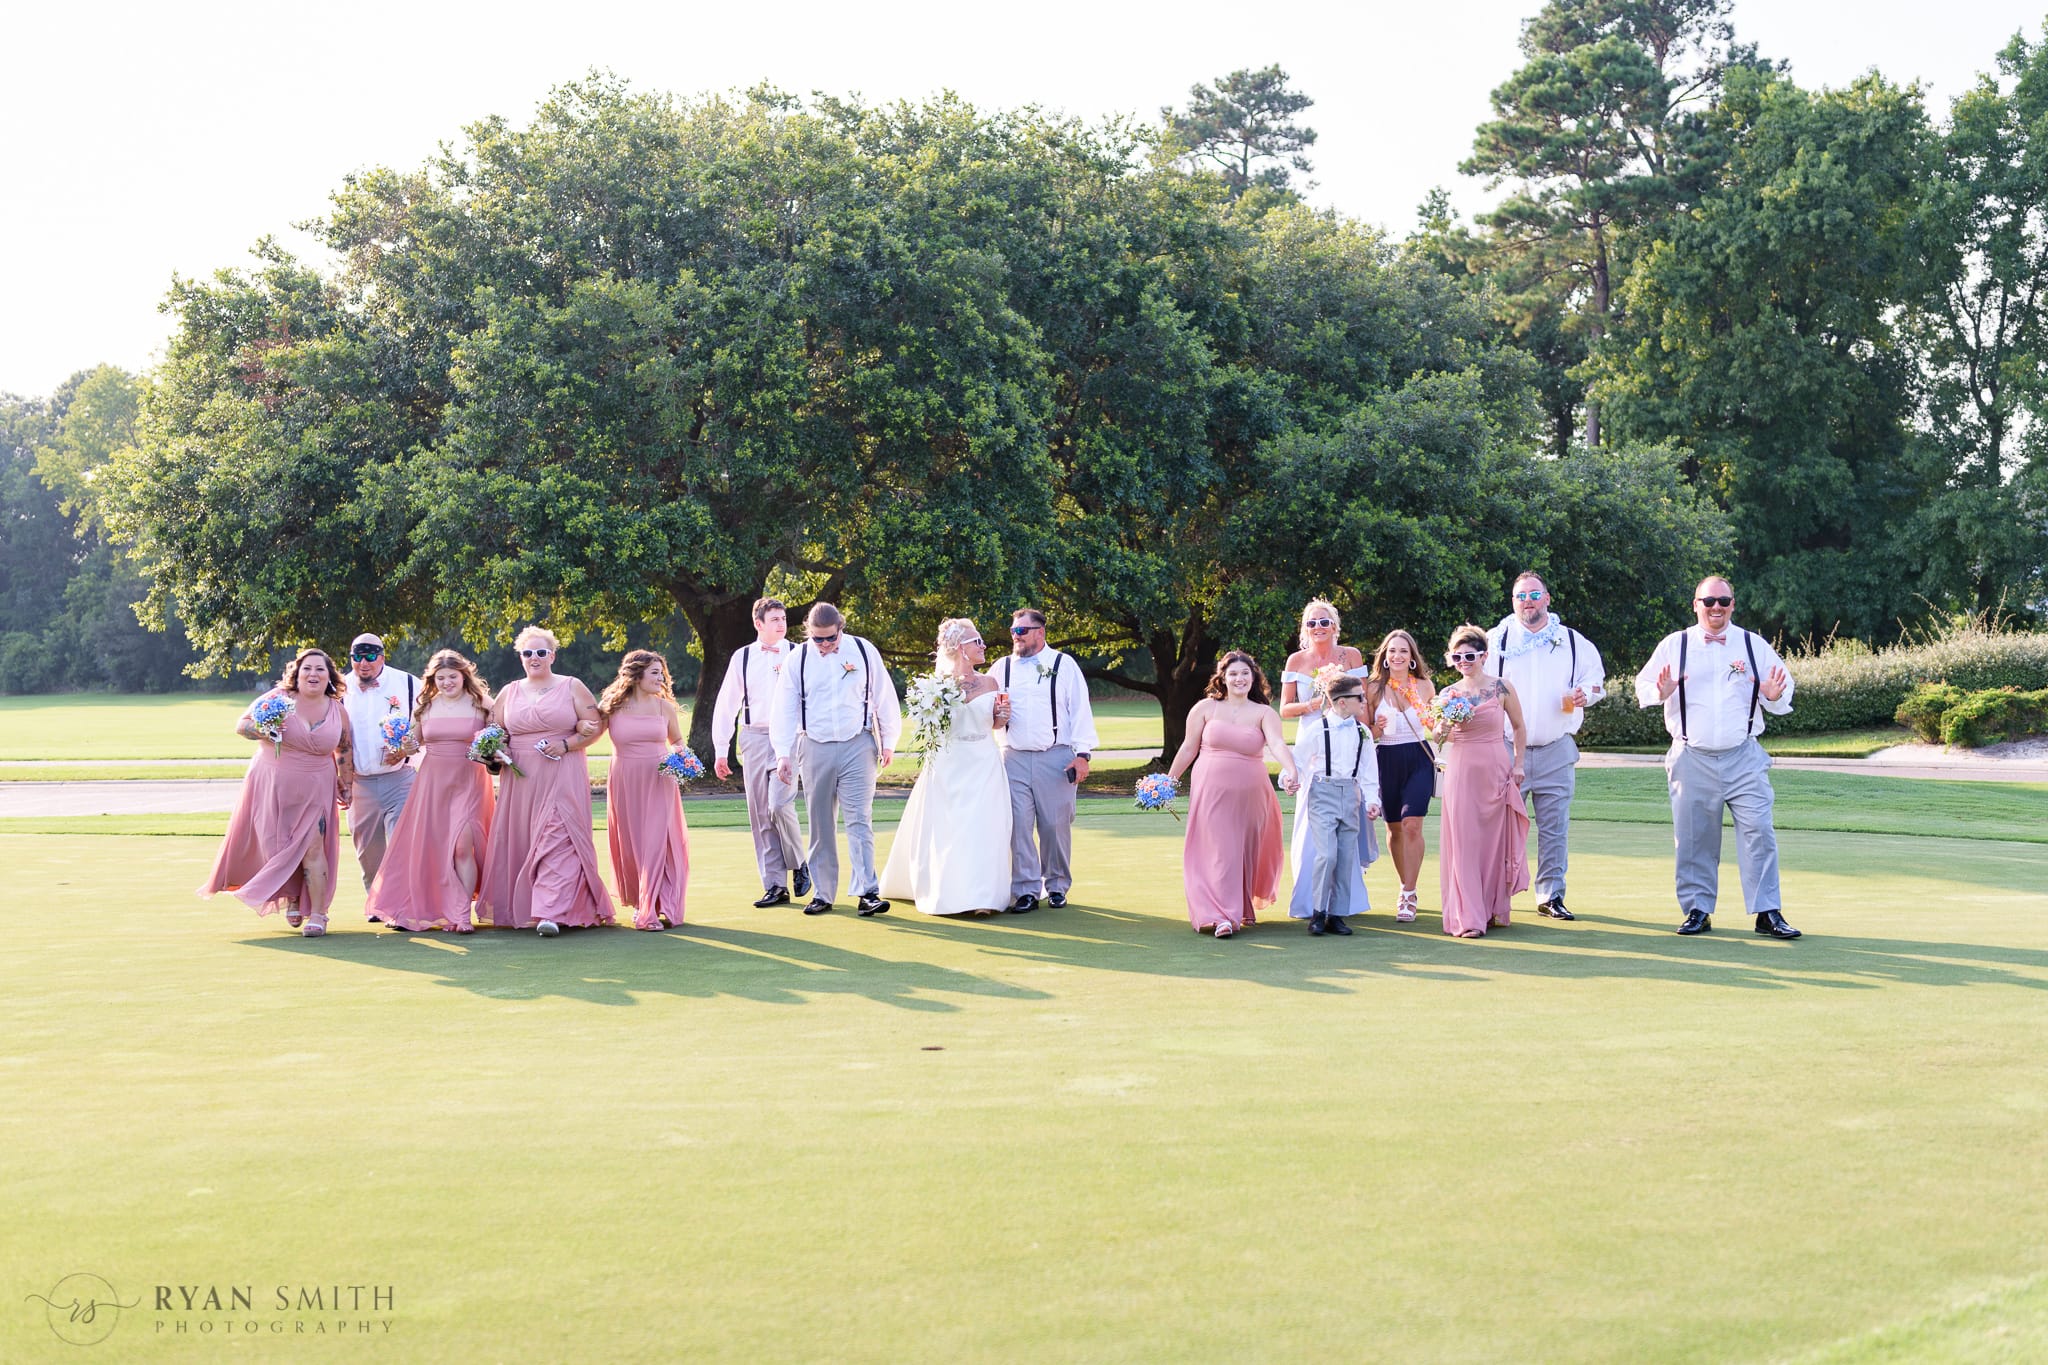 Bridal party walking down the golf course - Wild Wing Plantation